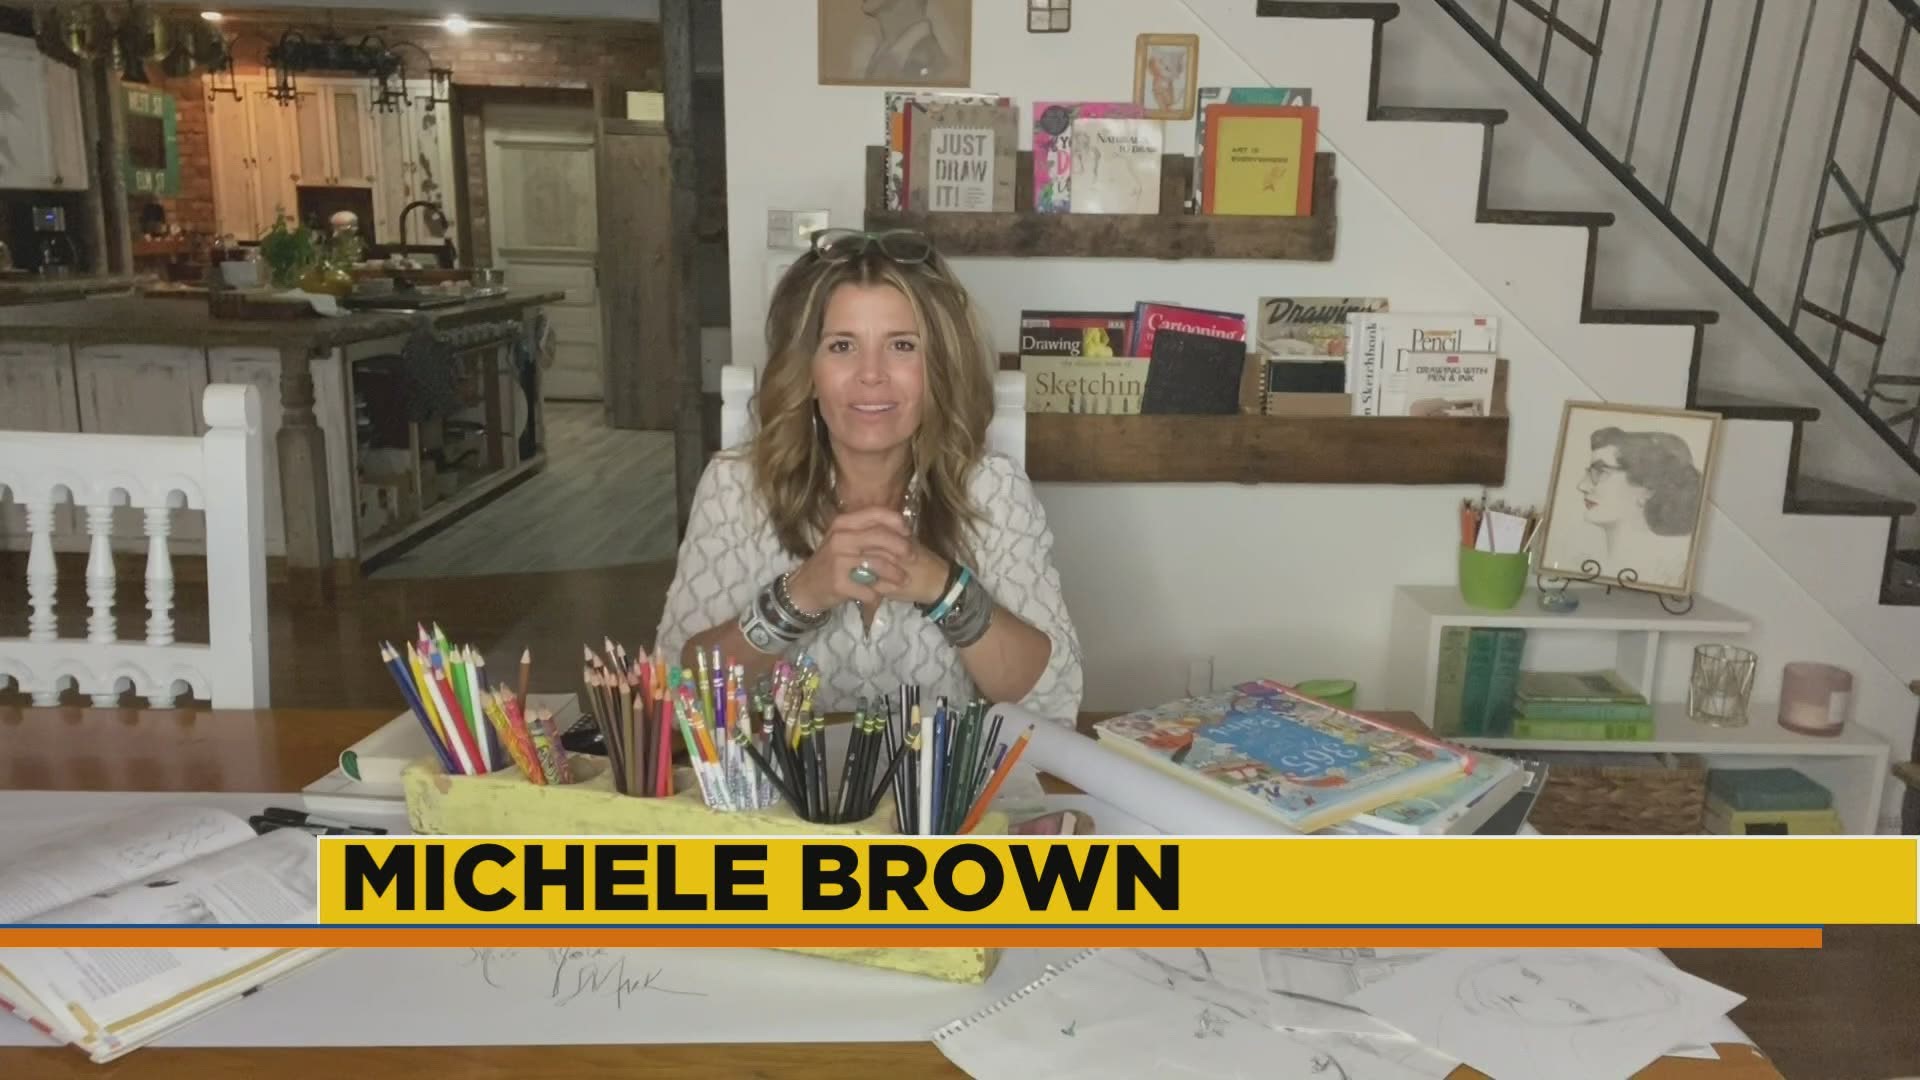 Michele explains how drawing can be a great mood booster